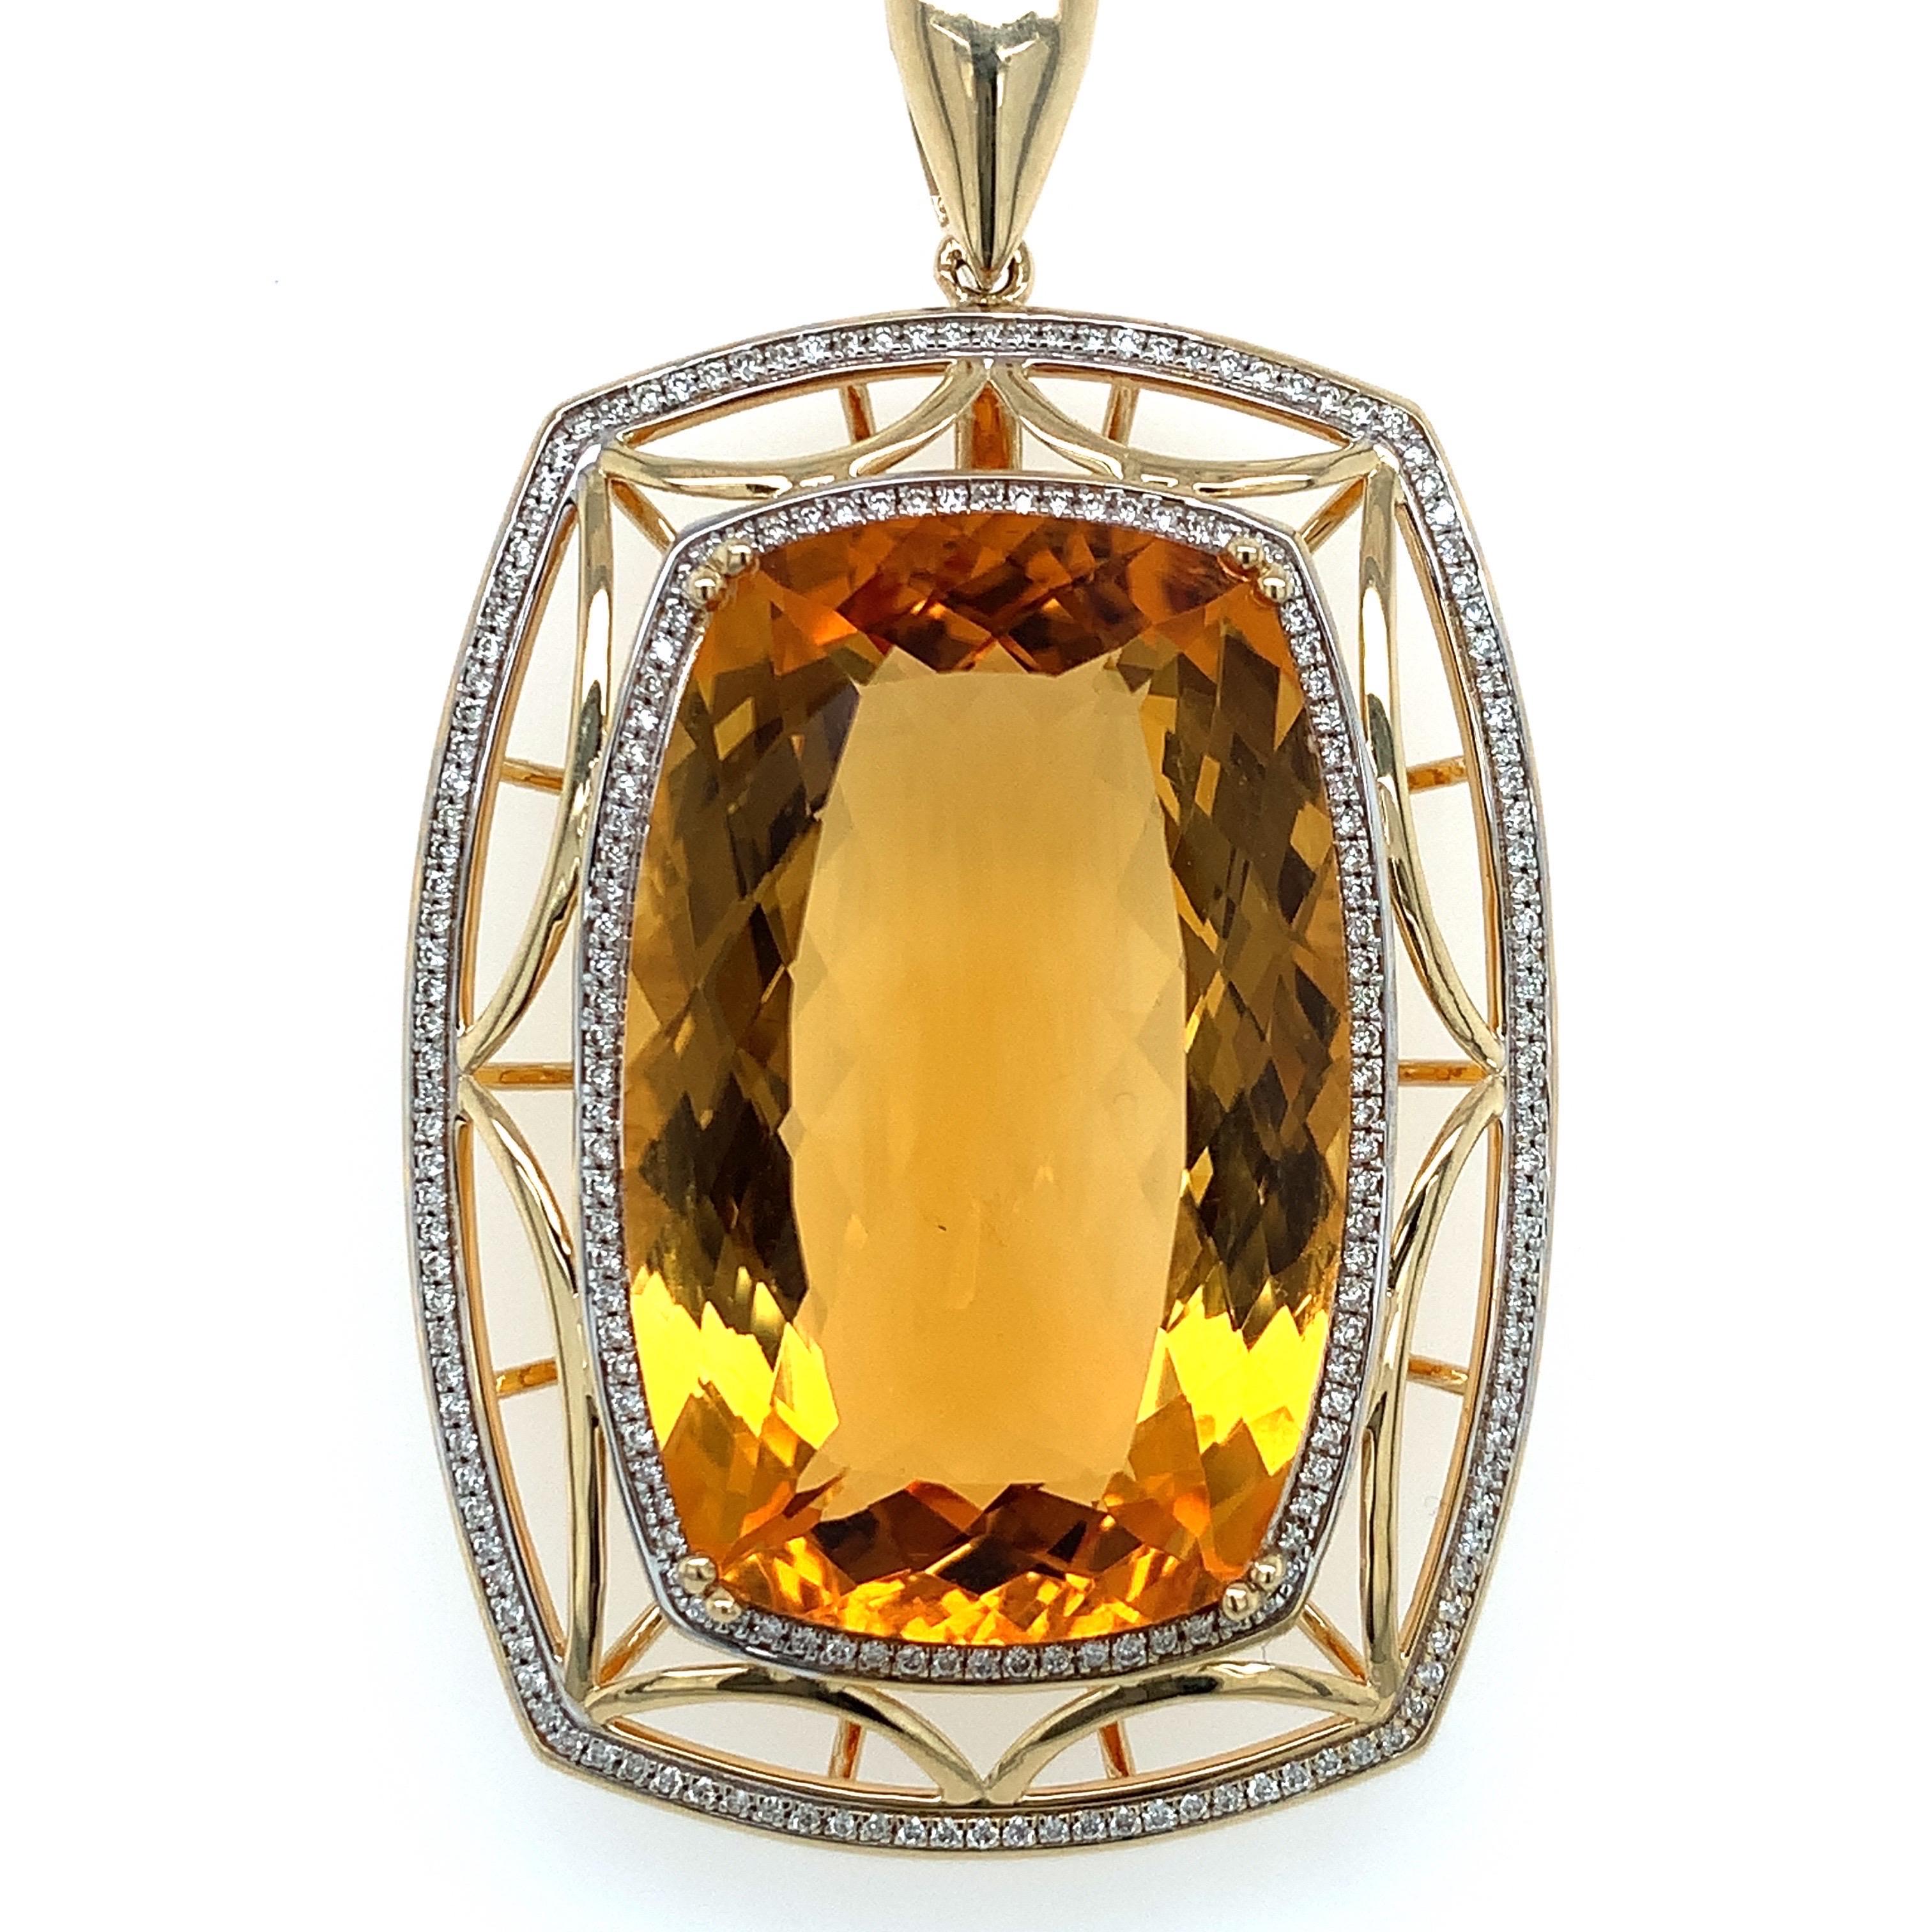 Glamorous bold citrine pendant. High brilliance golden honey tone, transparent clean, natural cushion faceted 35.11 carats citrine mounted in open basket with eight bead prongs, accented in round brilliant cut diamond frame. Handcrafted design set